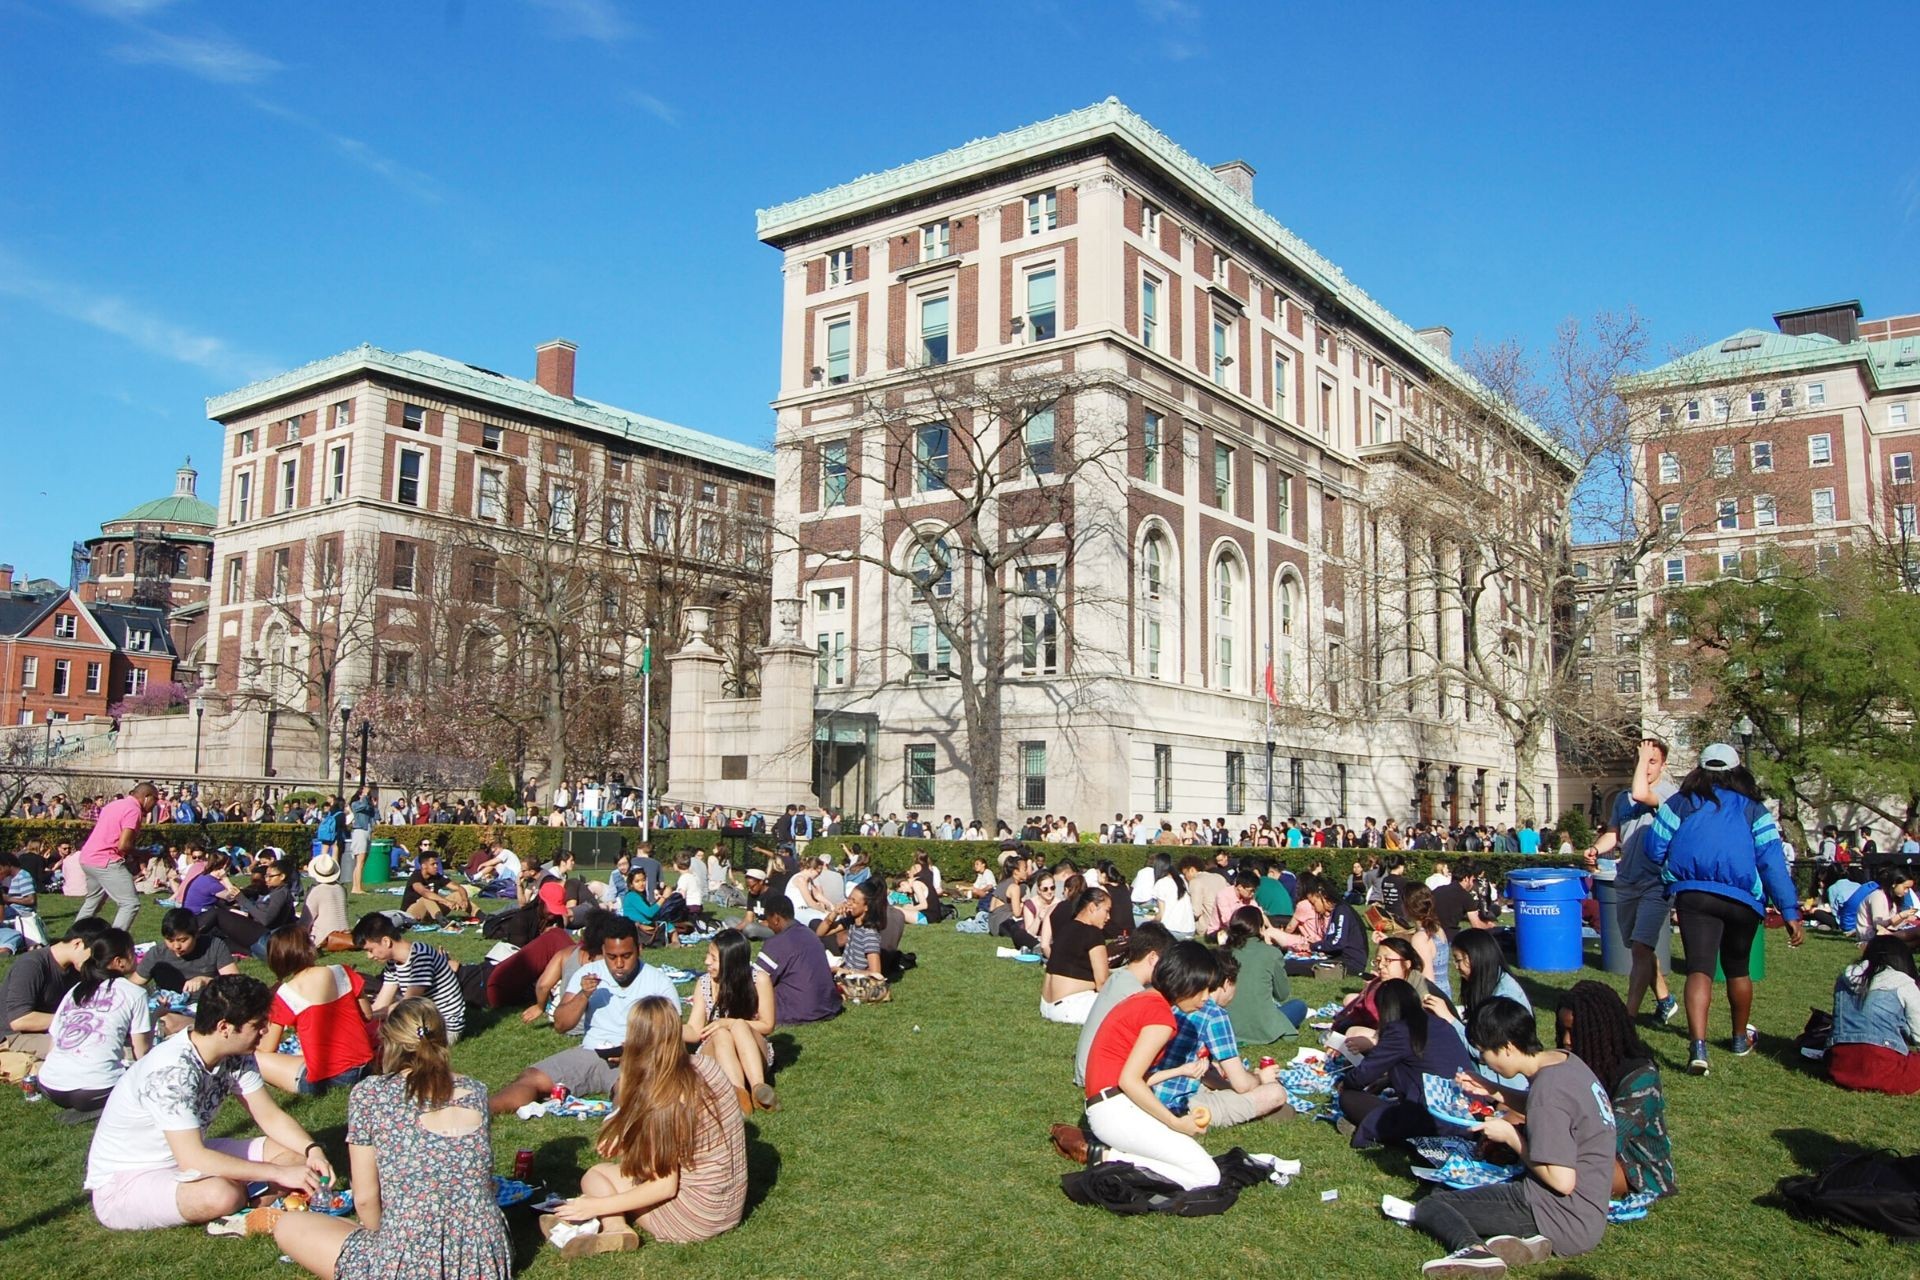 Columbia students picnicing on the lawn